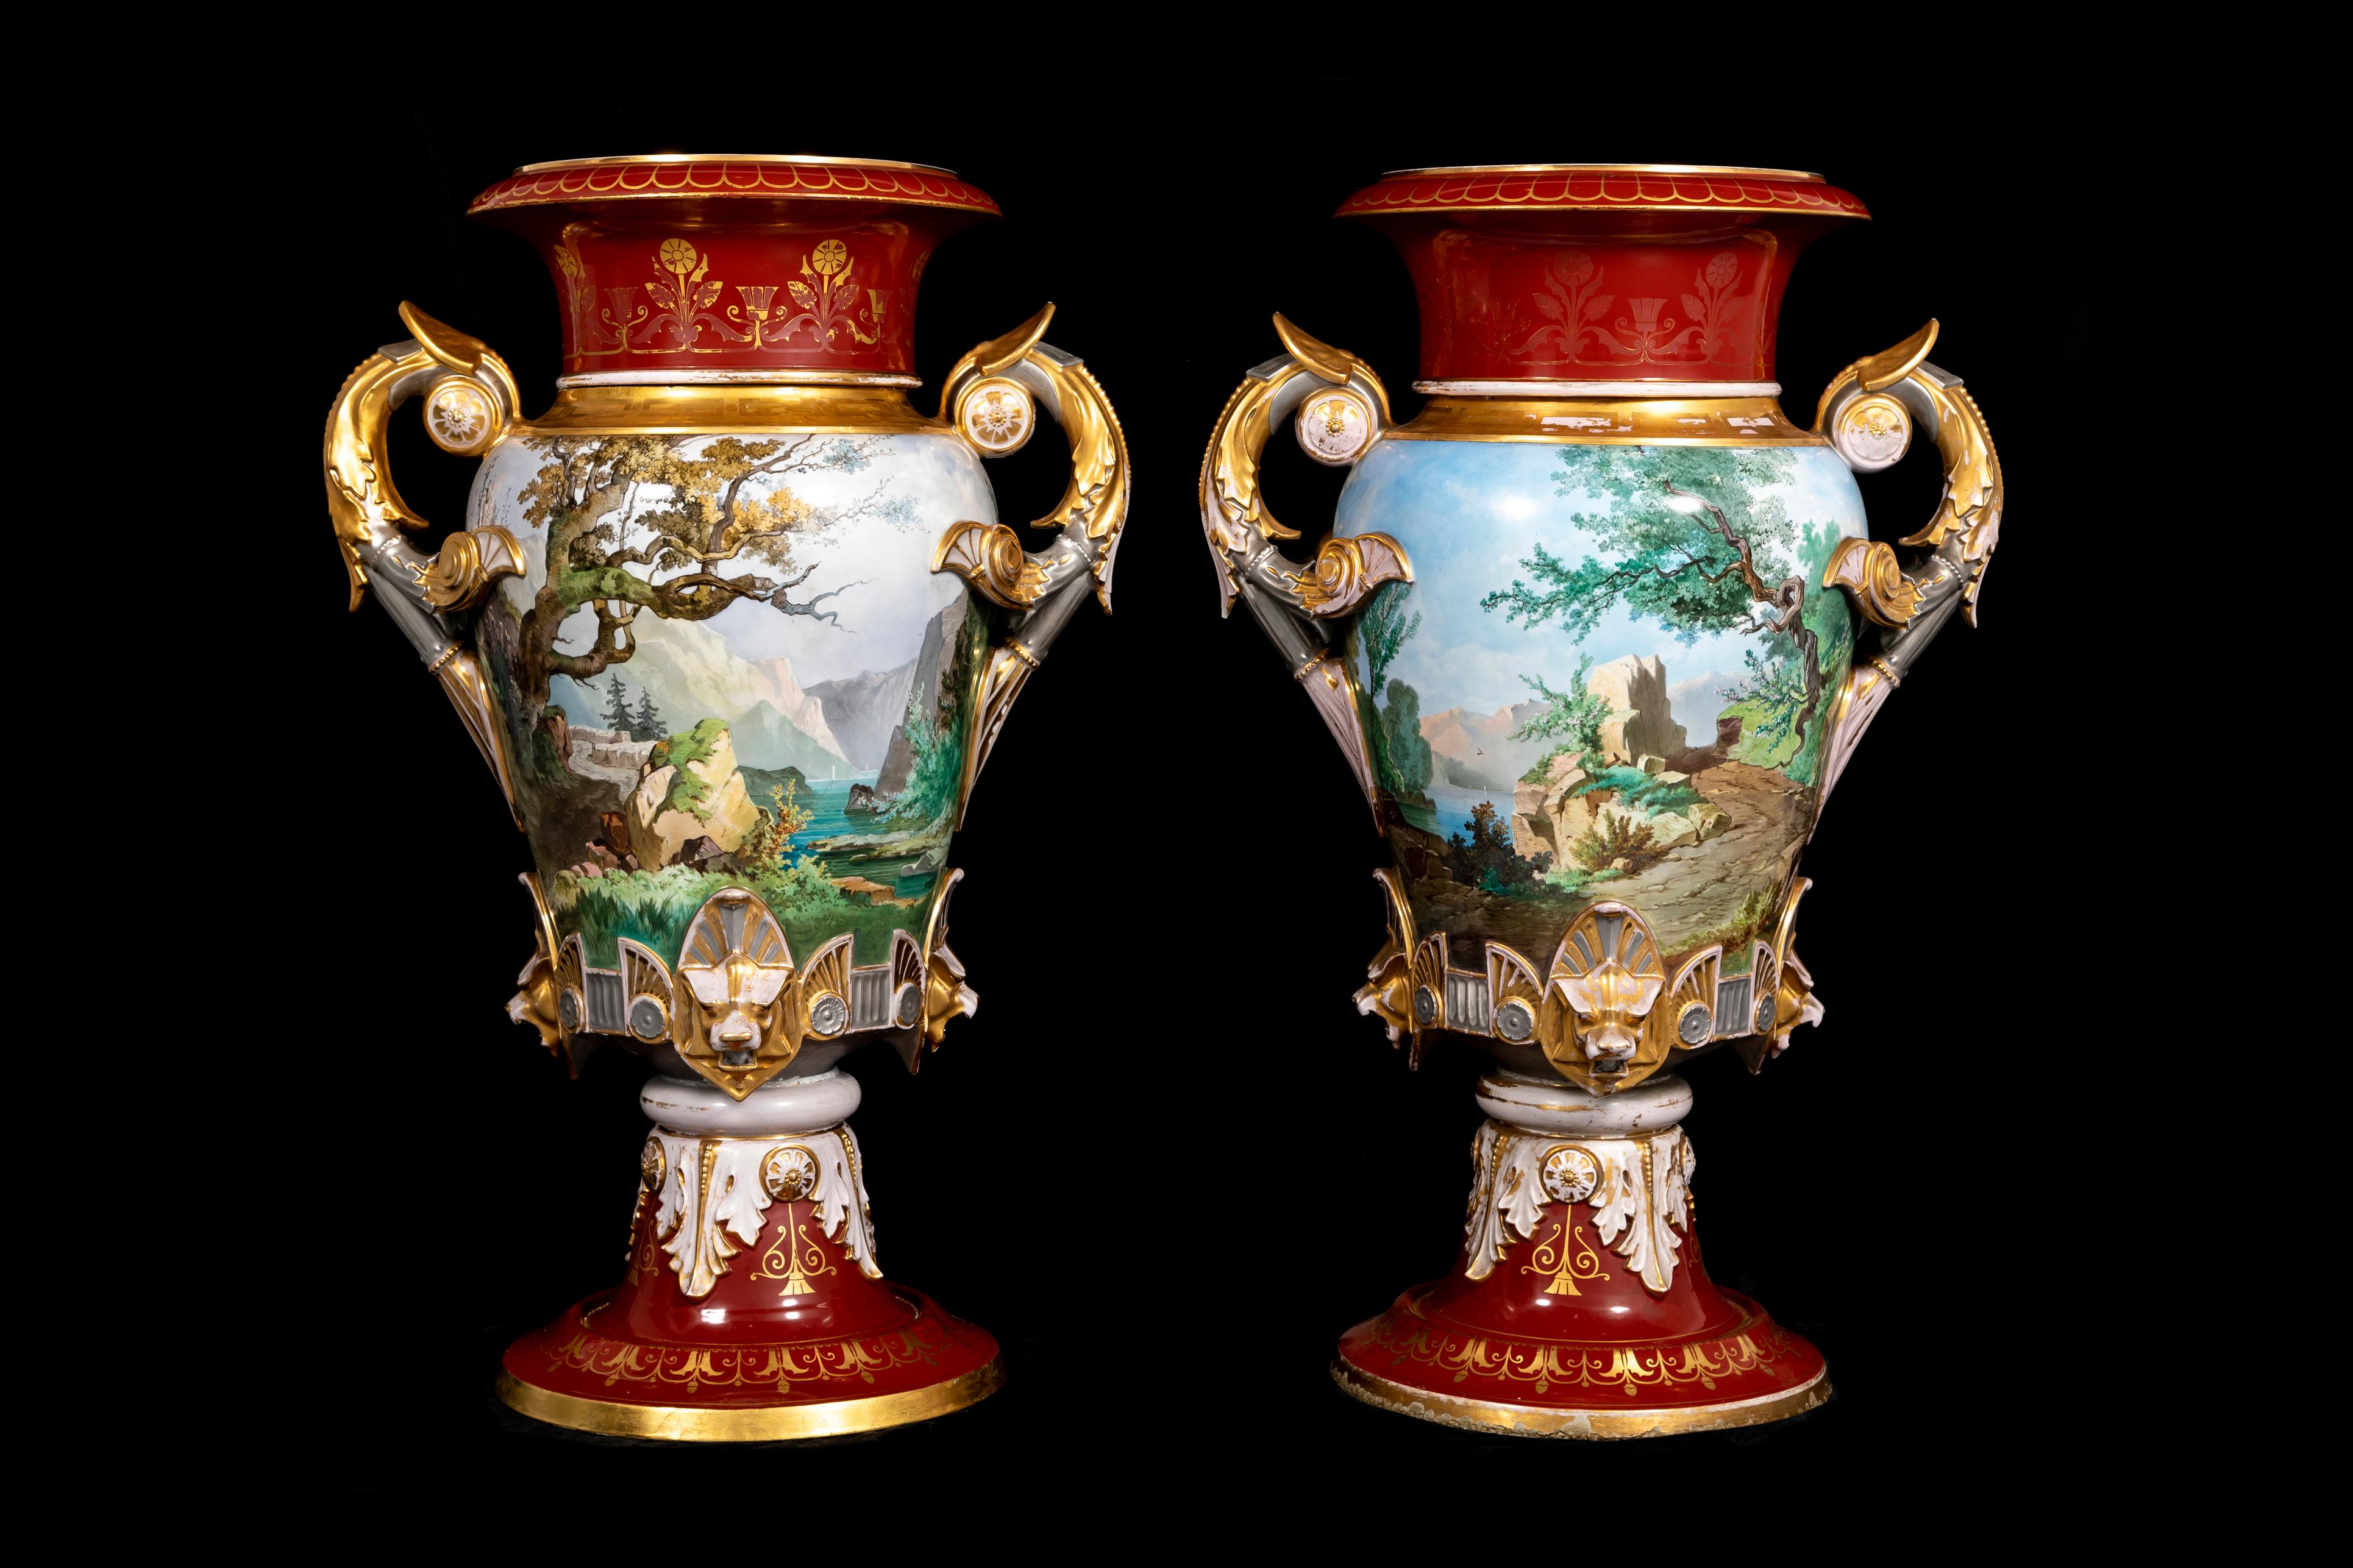 Magnificent in scale and adorned with opulent detailing were created in 1876 and bear the signature of A. Carrier Hammer, these monumental baluster vases stand at an impressive height of 43½ inches. The everted mouths are embellished with a gilt